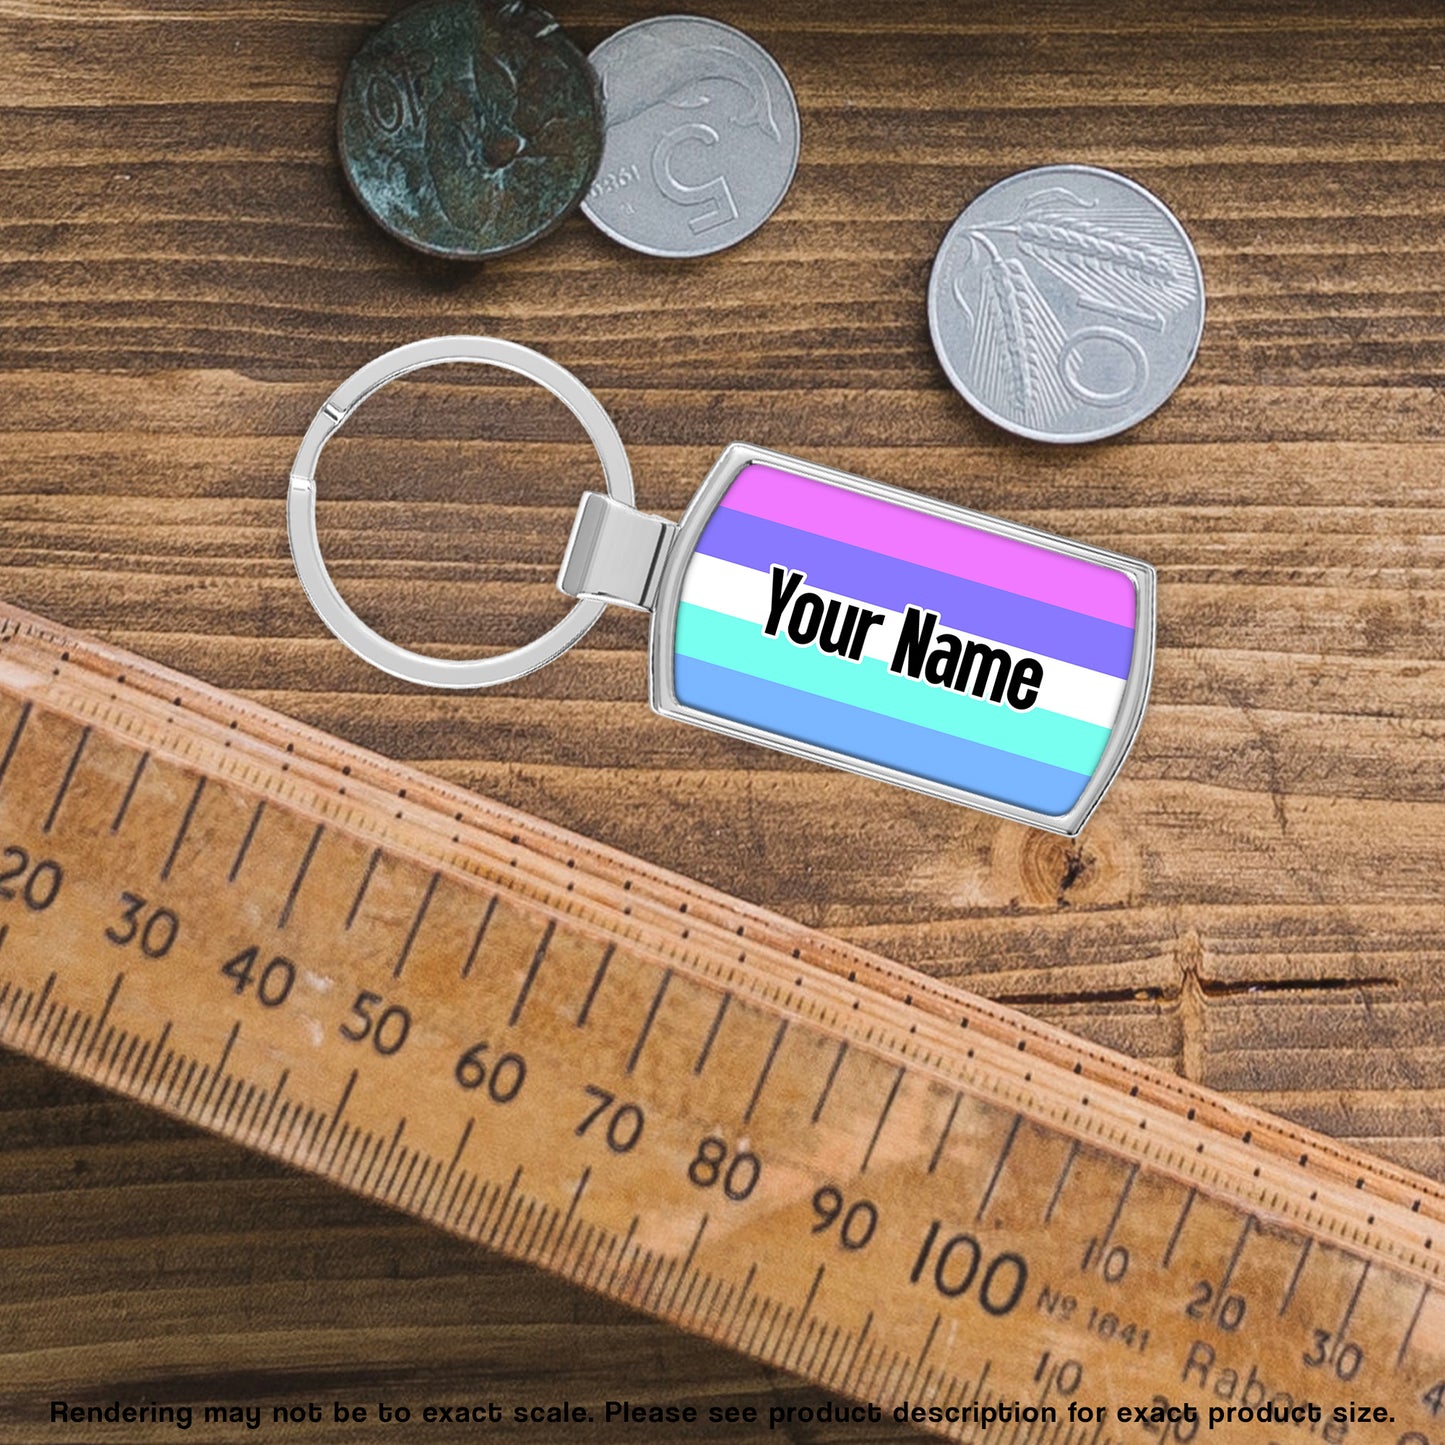 Spectrasexual pride flag metal keyring personalised with your name